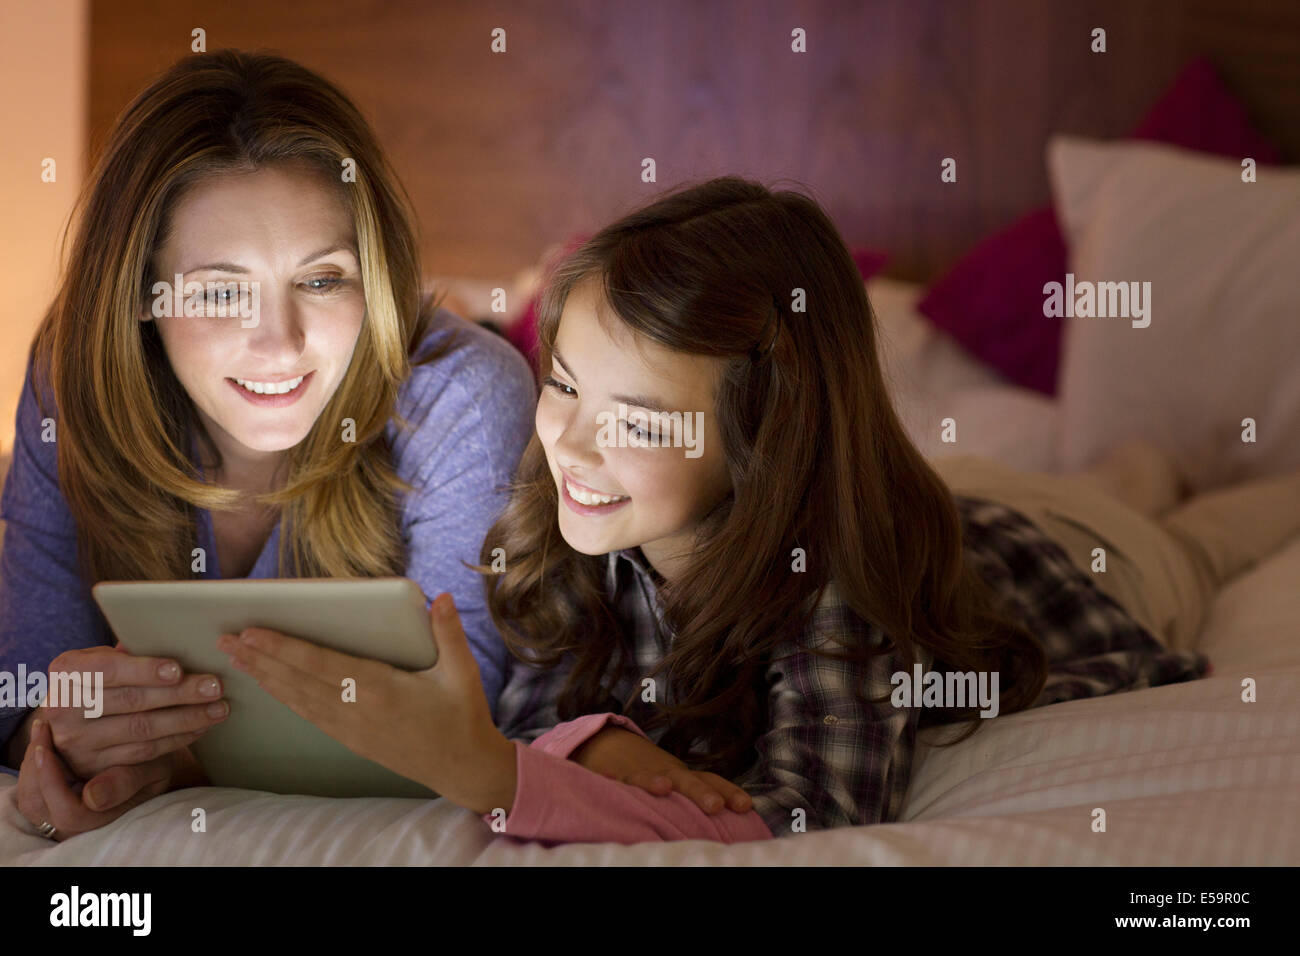 Mother and daughter using digital tablet on bed Stock Photo